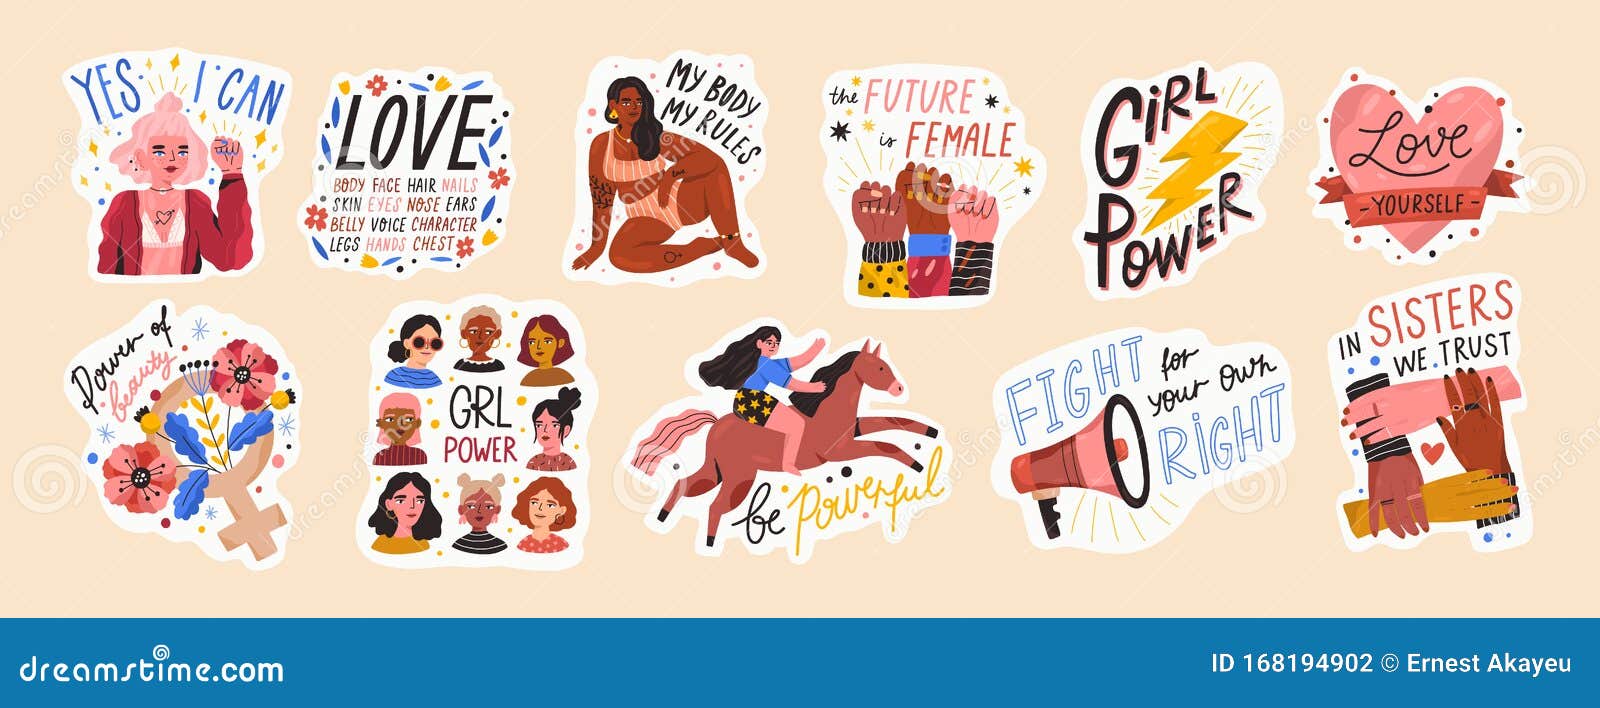 never apologize for being a powerful f*cking woman sticker feminist sticker, feminism